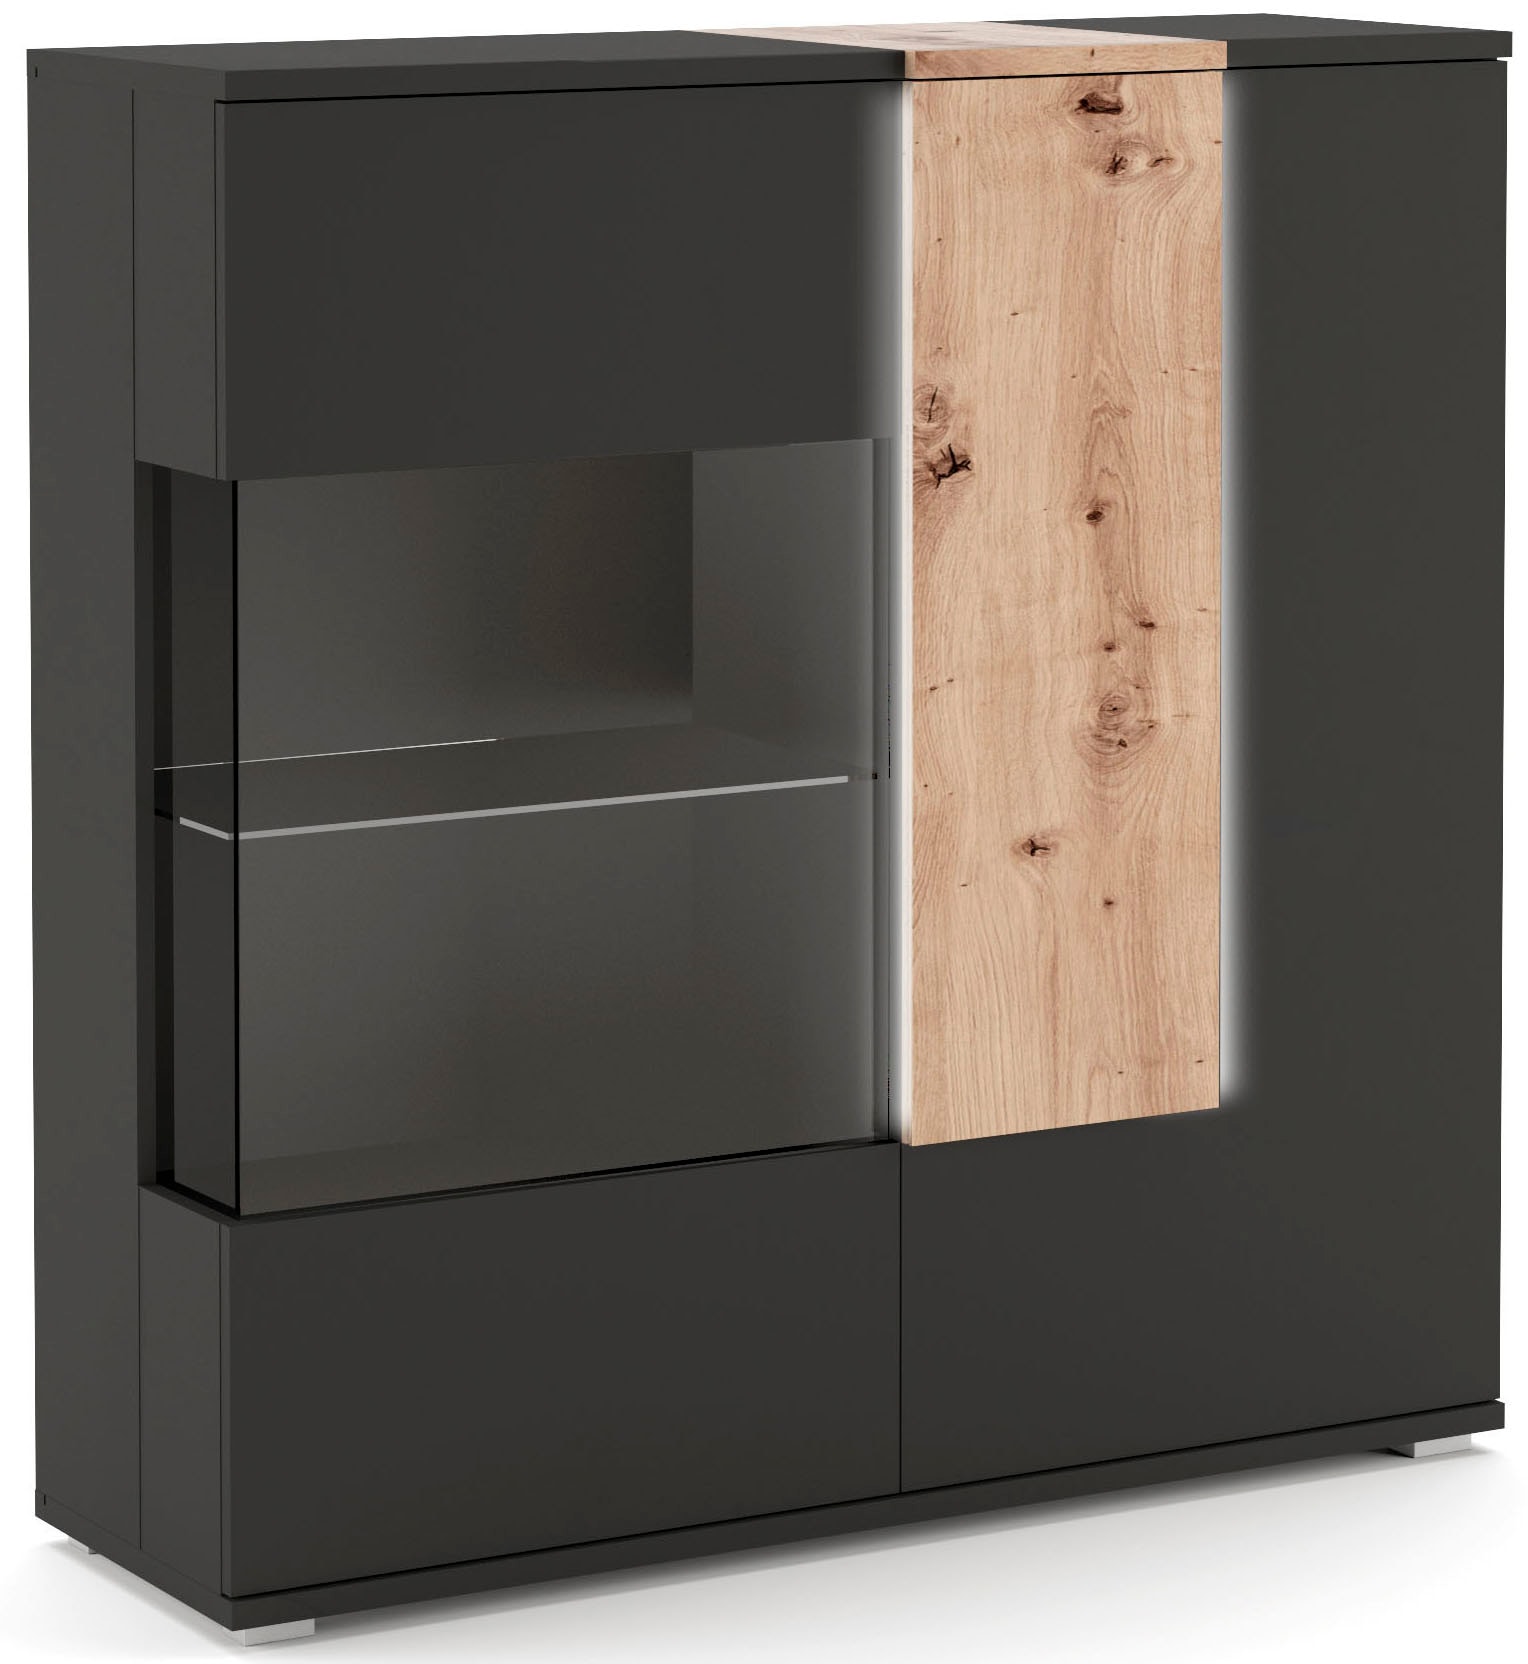 Highboard »Montana«, Breite 120 cm, inkl. LED-Beleuchtung und Push-To-Open